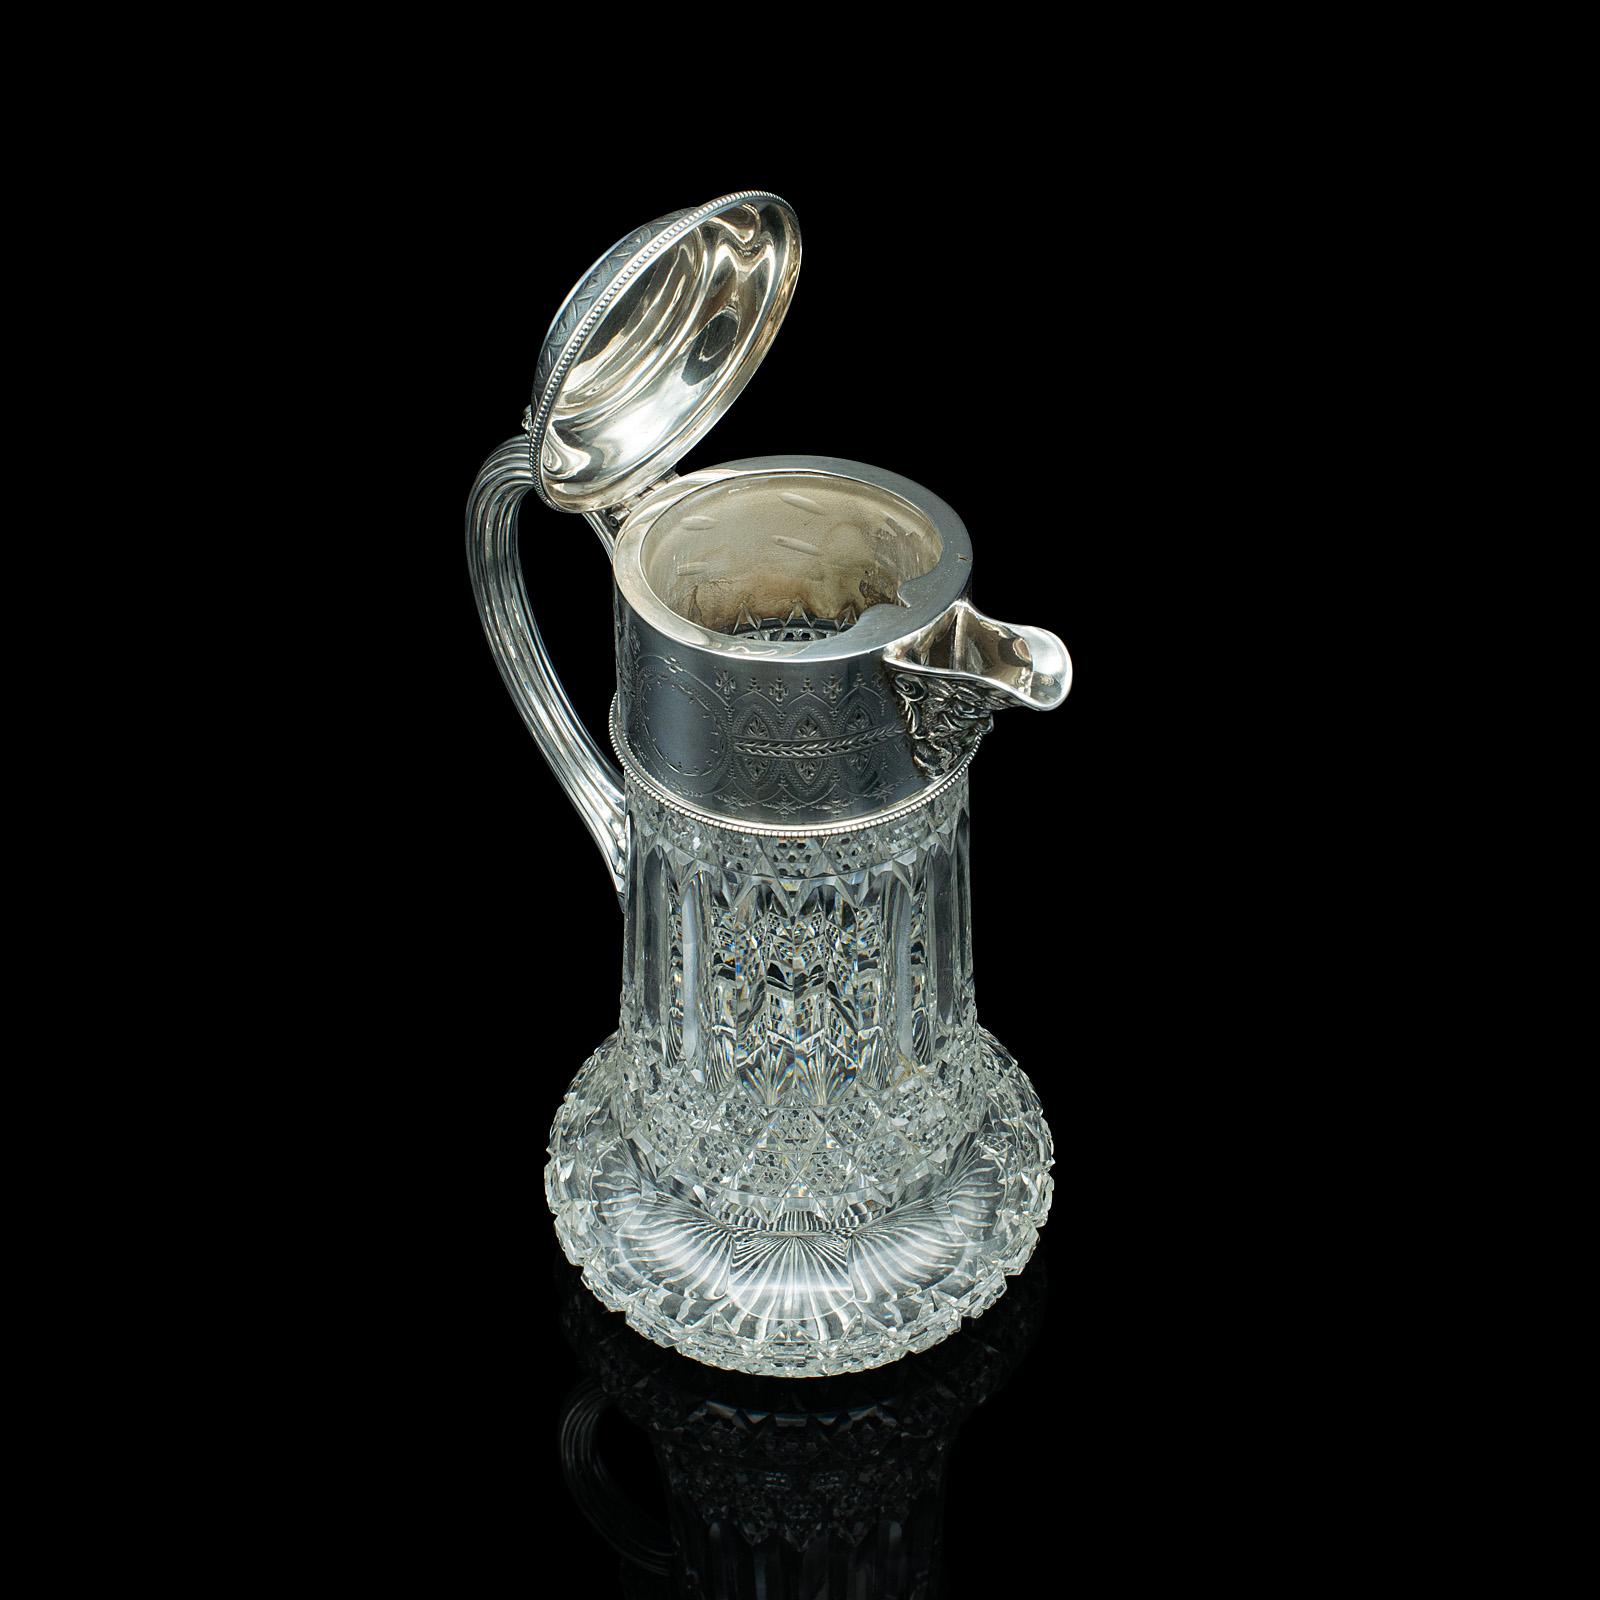 Antique Claret Jug, English, Cut Glass, Silver Plate, Decanter, Victorian, 1900 For Sale 1